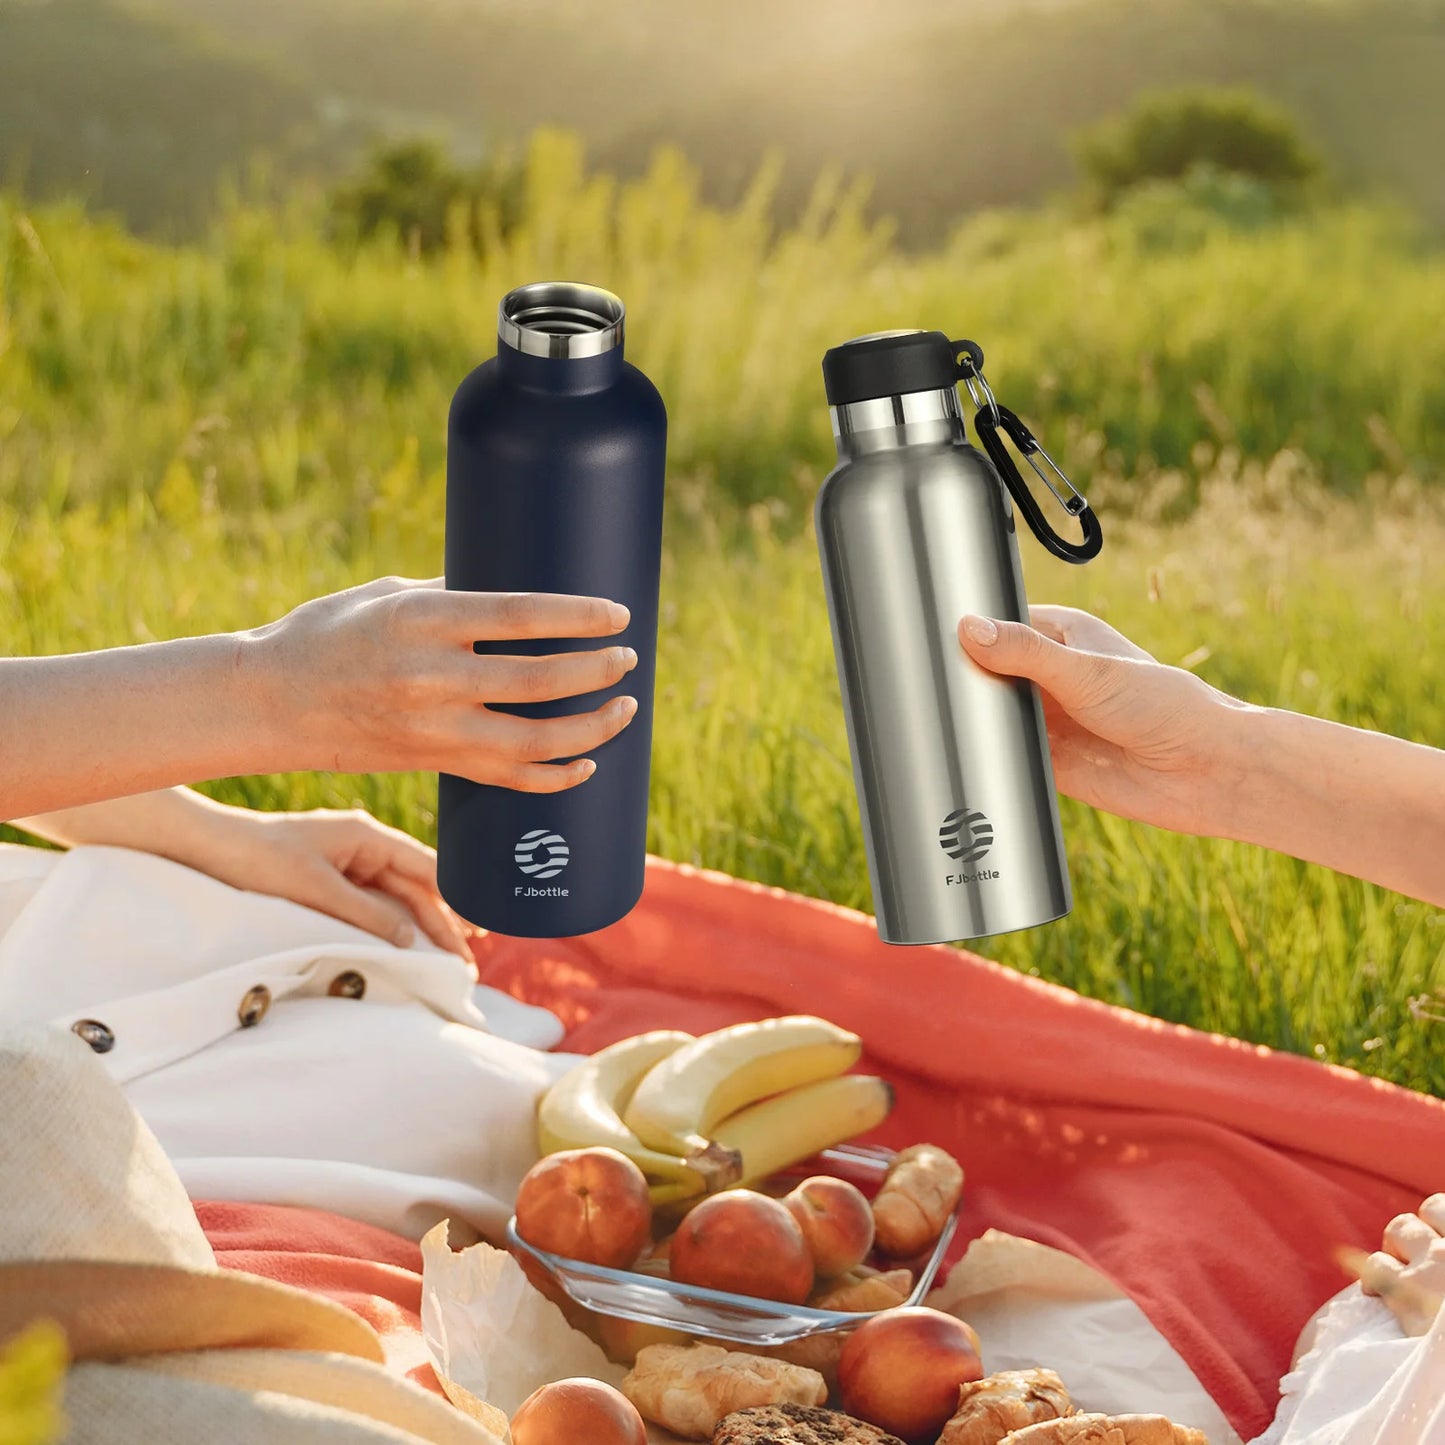 FEIJIAN Thermos Portable Water Bottle Stainless Steel Thermal Cup Leak-proof Flask Mini 500ML/600ML